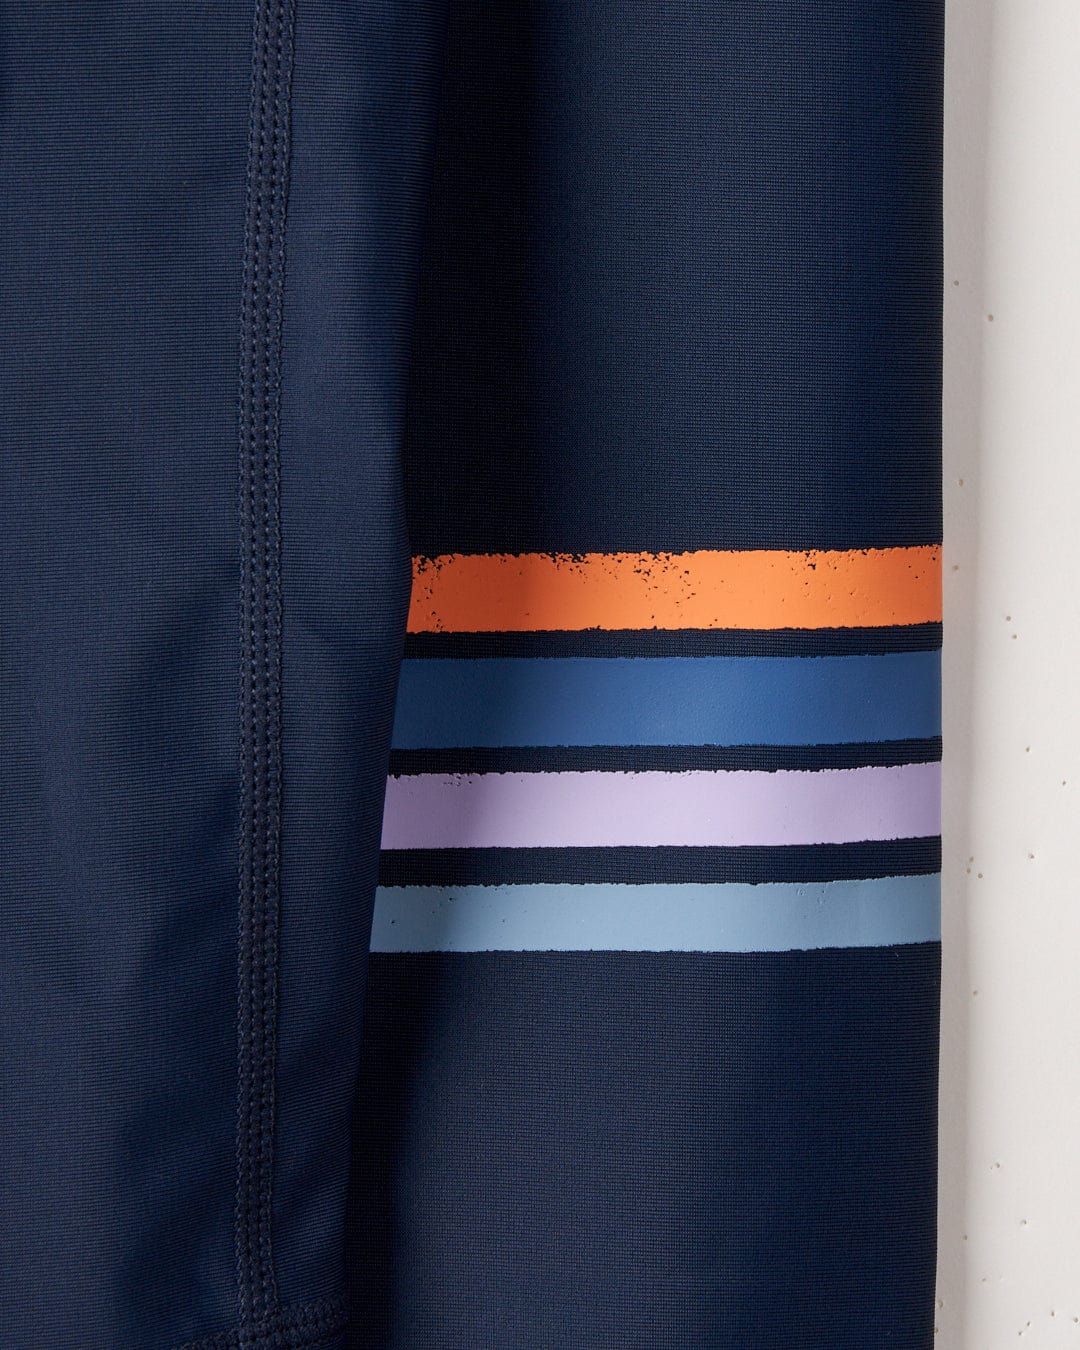 Close-up of a Saltrock SR Original - Recycled Mens Long Sleeve Rashvest - Blue with horizontal stripes in orange, blue, and purple, designed for UPF 50 protection, hanging next to a white column.